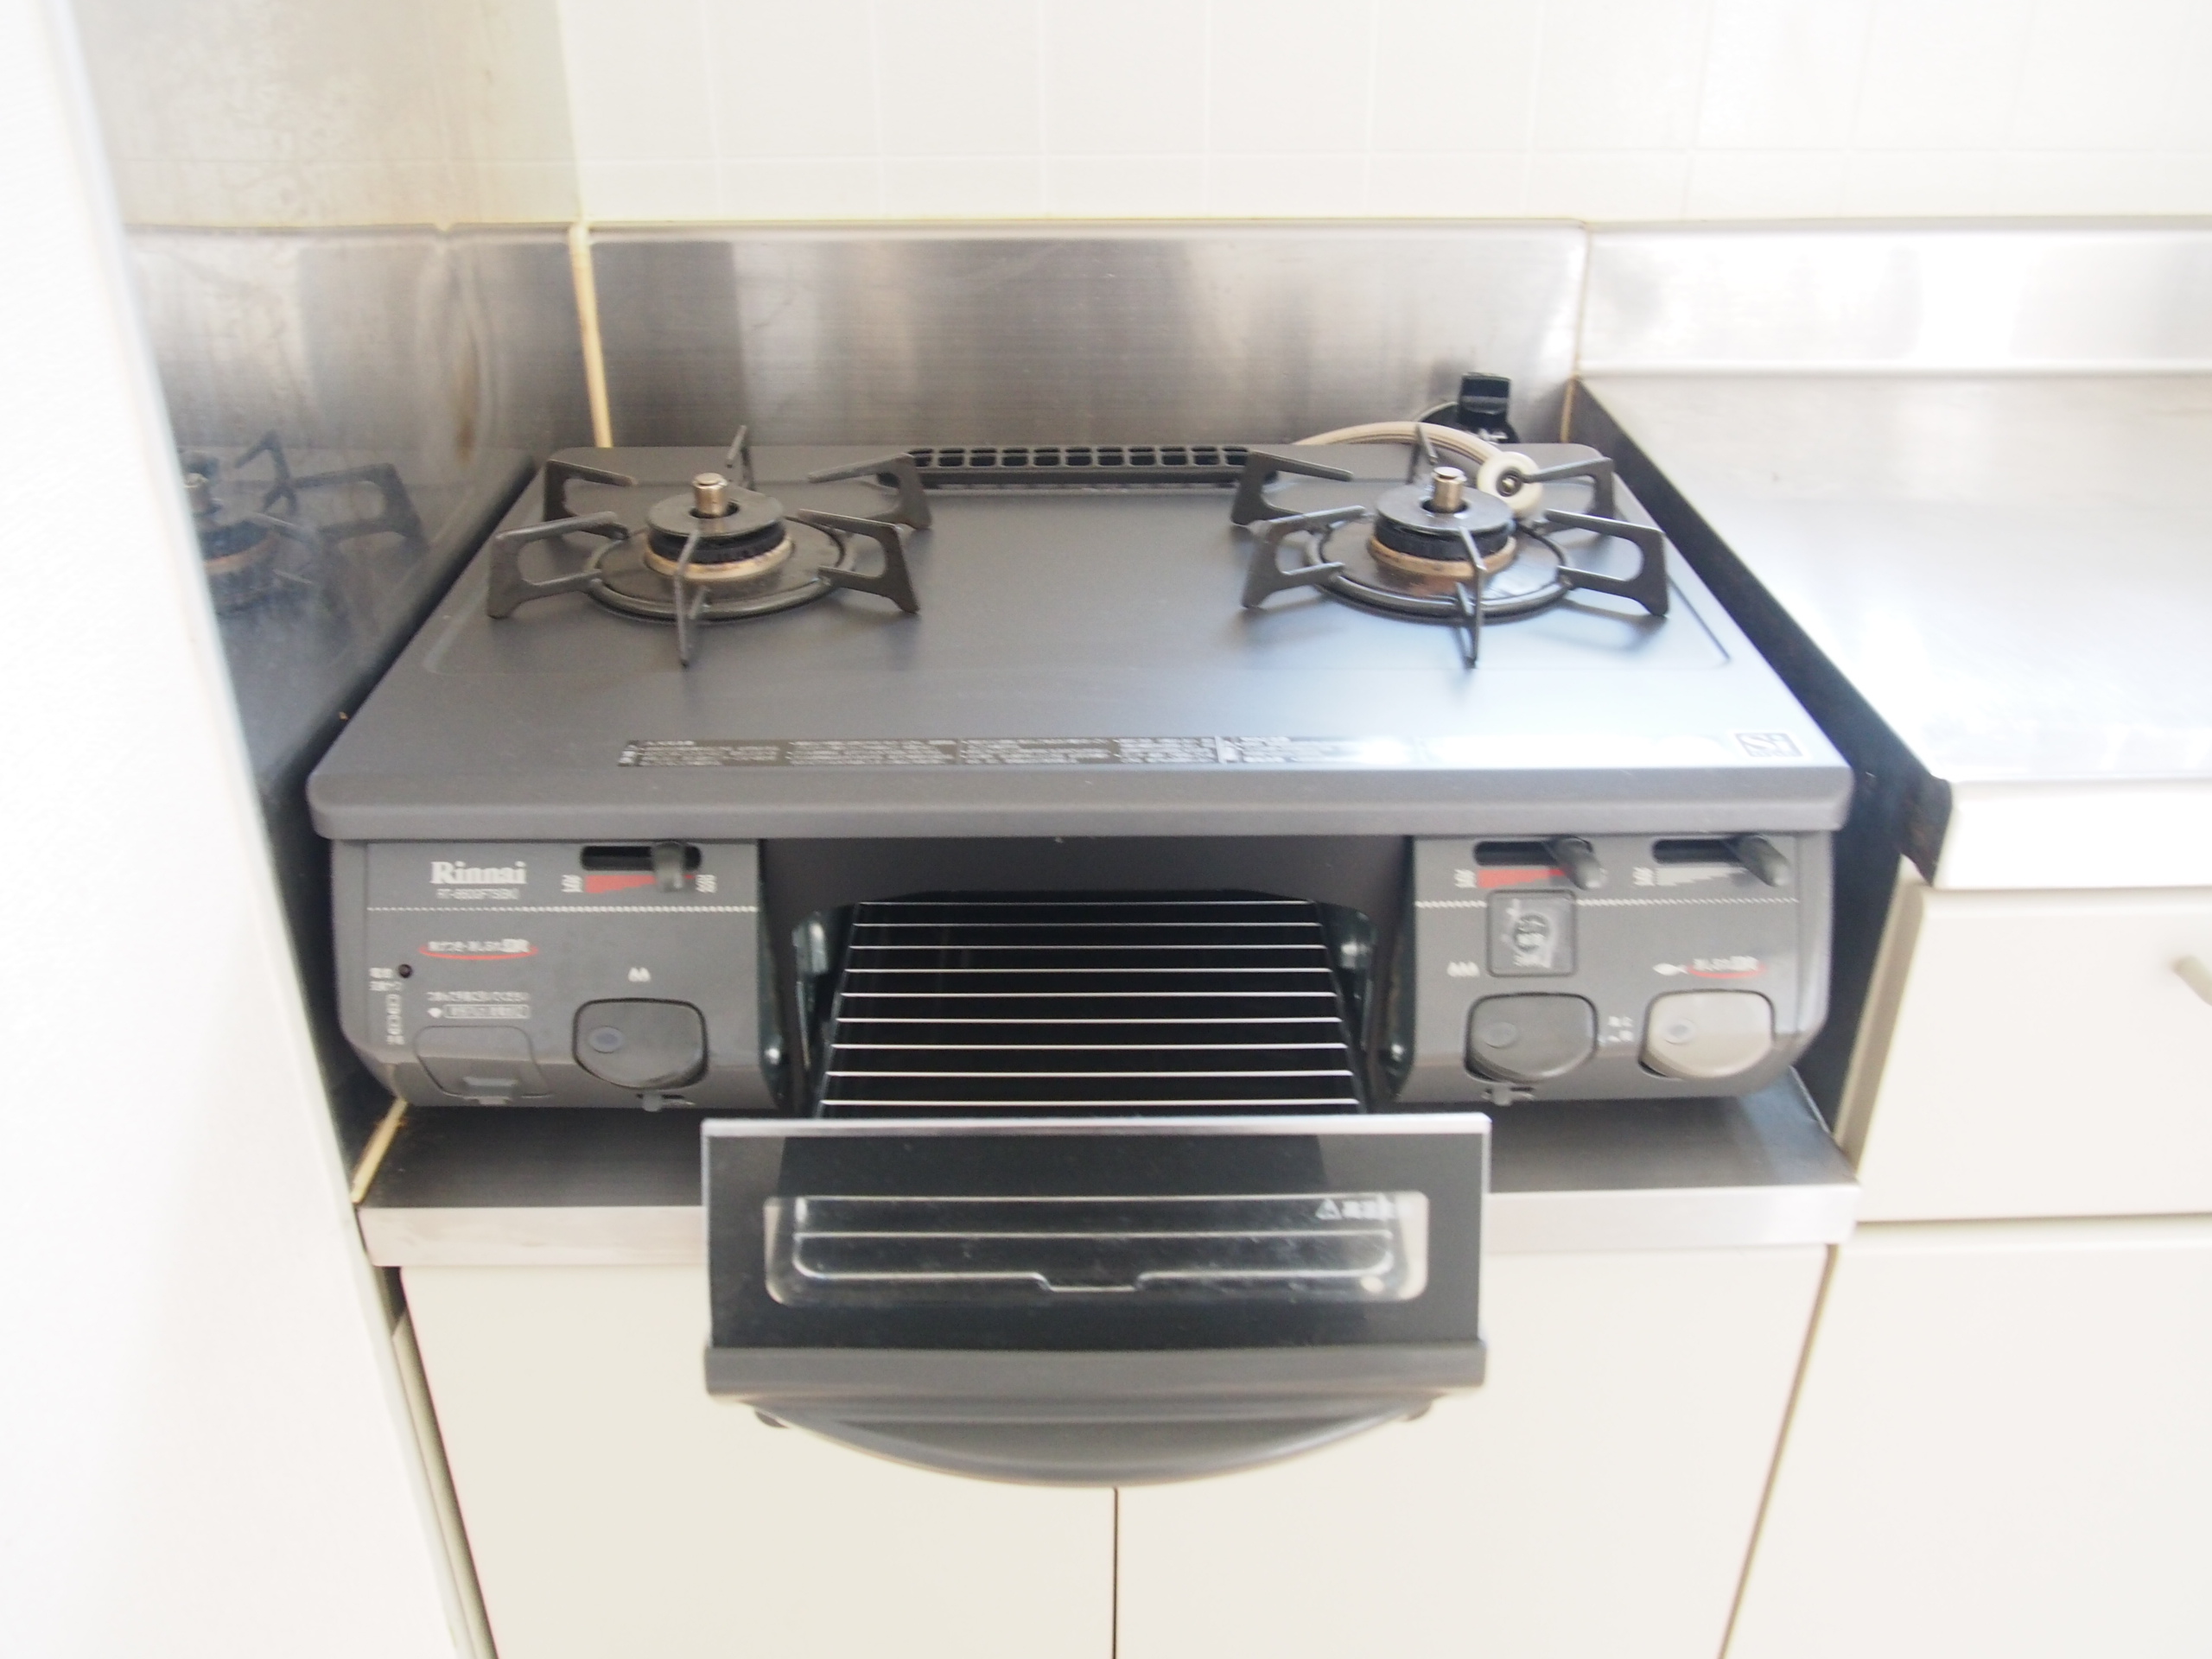 Kitchen. Get the unused gas stove if now. With grill.